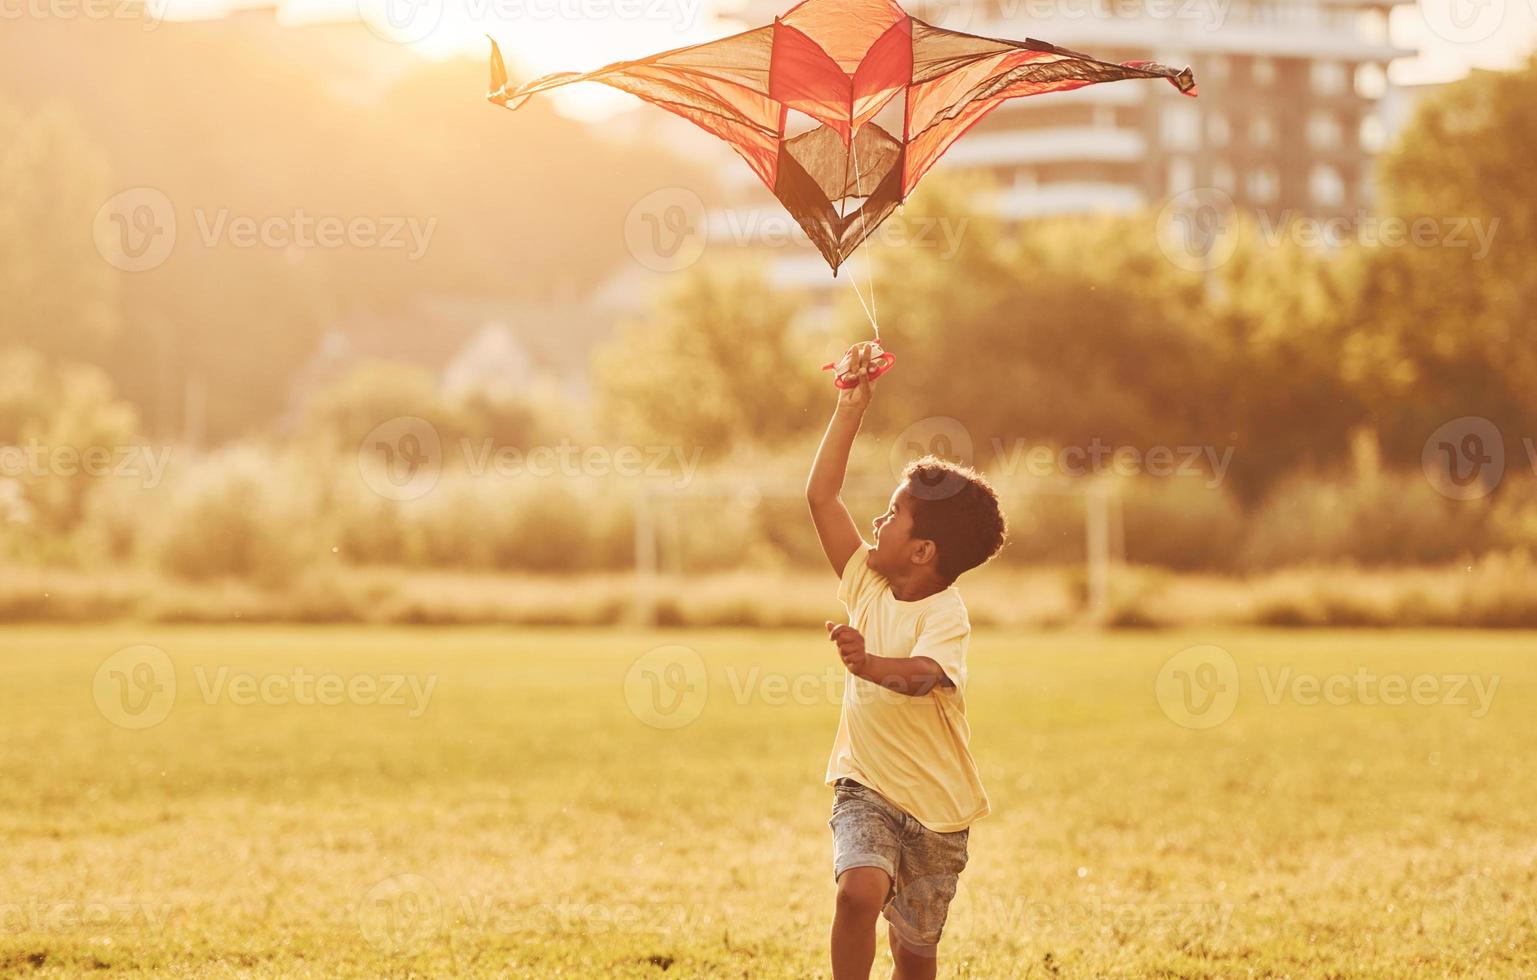 Red kite. African american kid have fun in the field at summer daytime photo